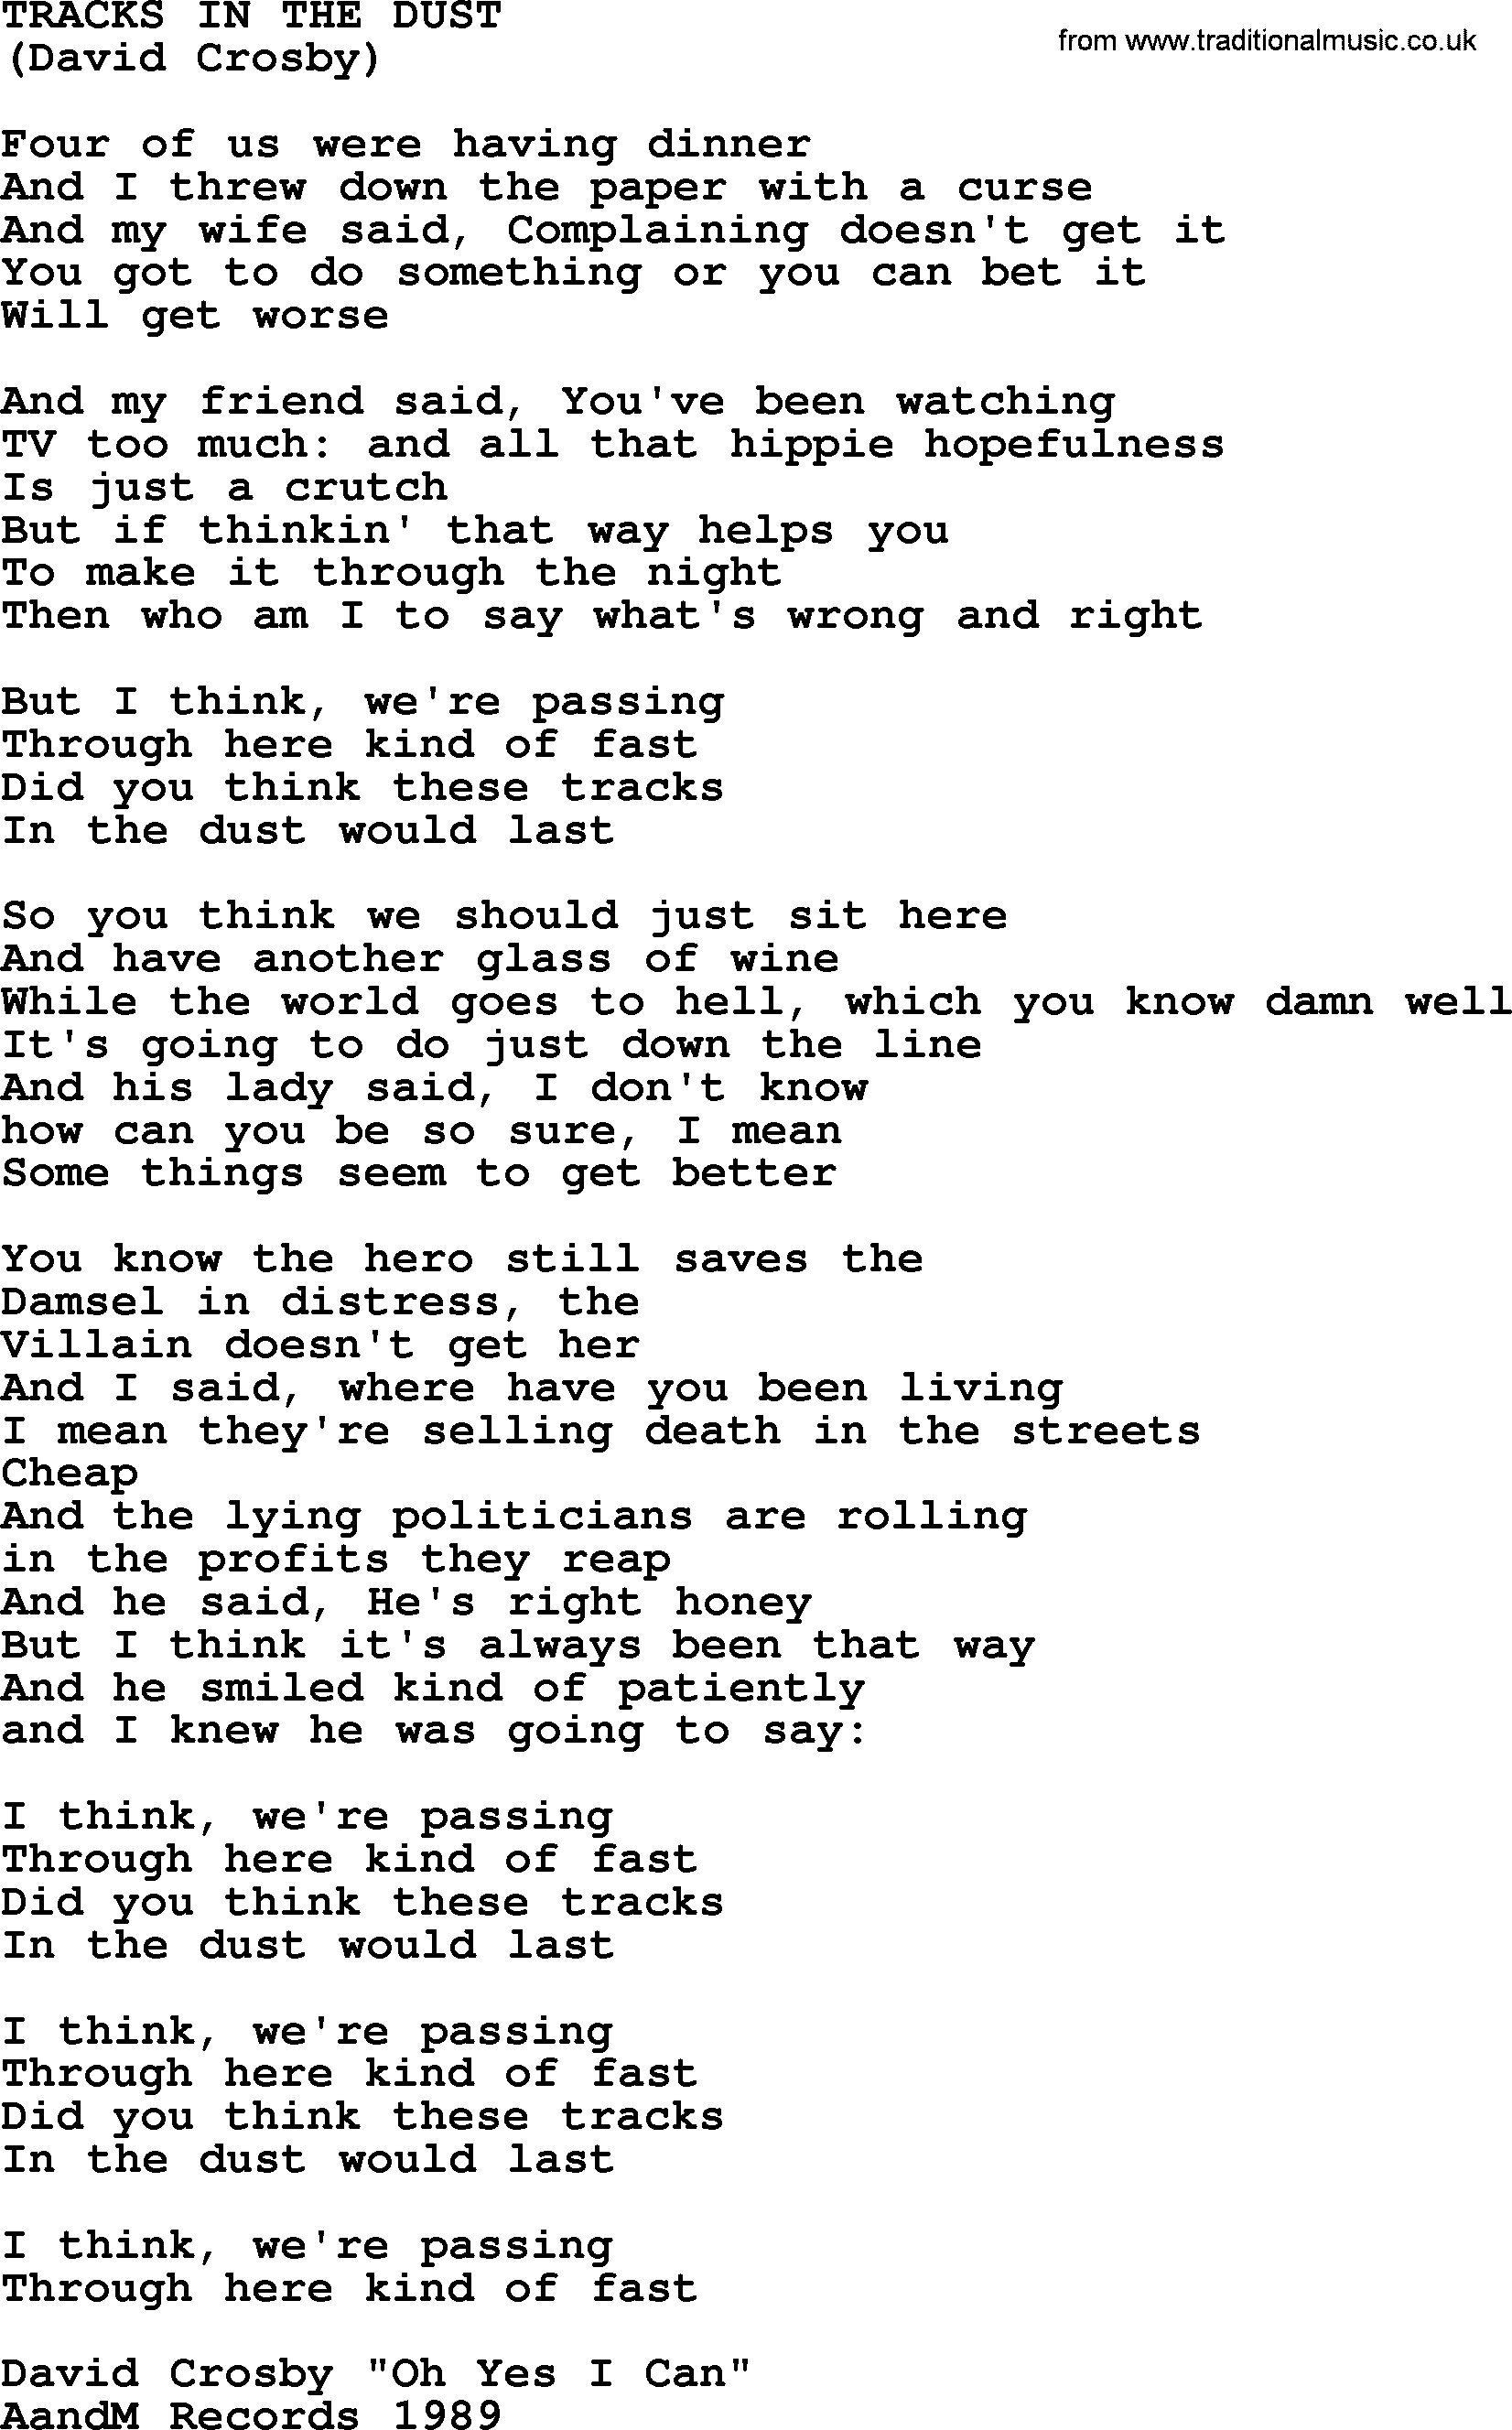 The Byrds song Tracks In The Dust, lyrics